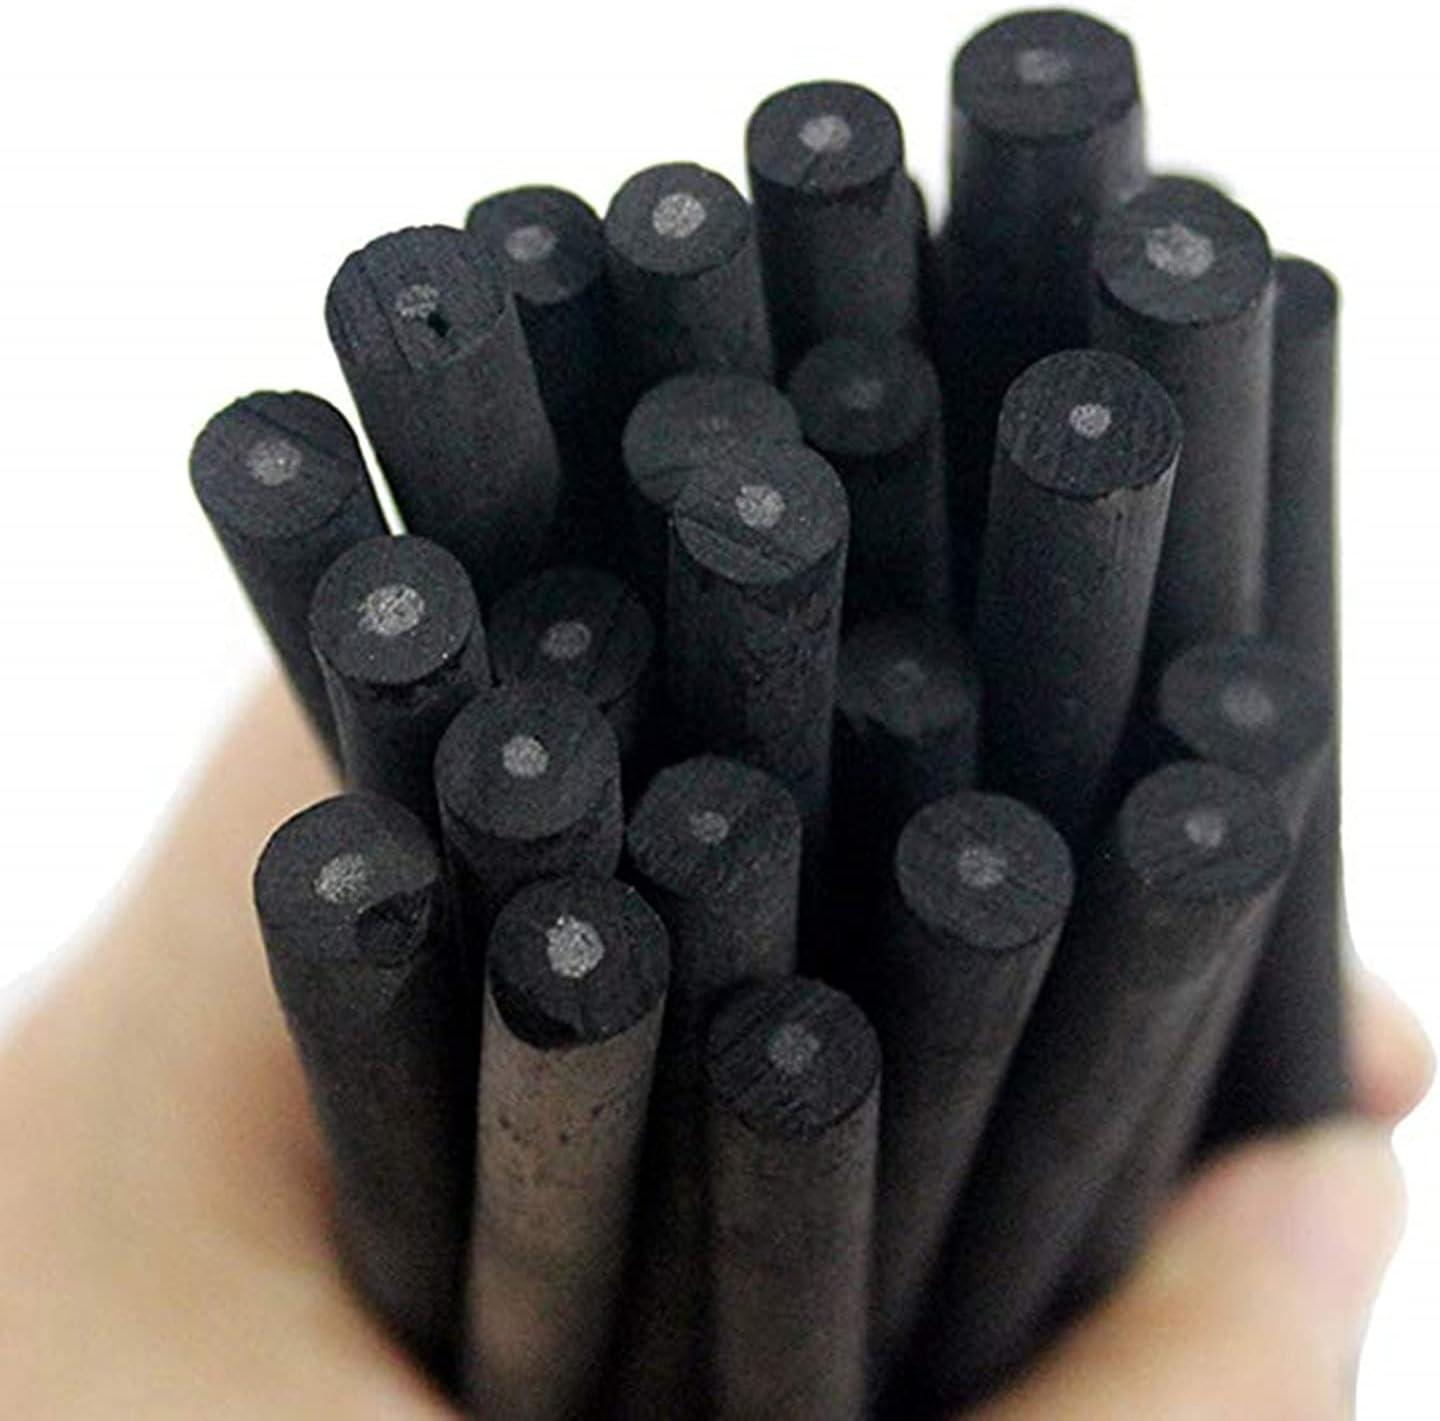 XHBTS 50 Pcs Willow Charcoal, Soft, Black Charcoal Sticks for Drawing,  Sketching, and Fine Art, Willow Sketch Charcoal Pencils for Drawing -2 Box